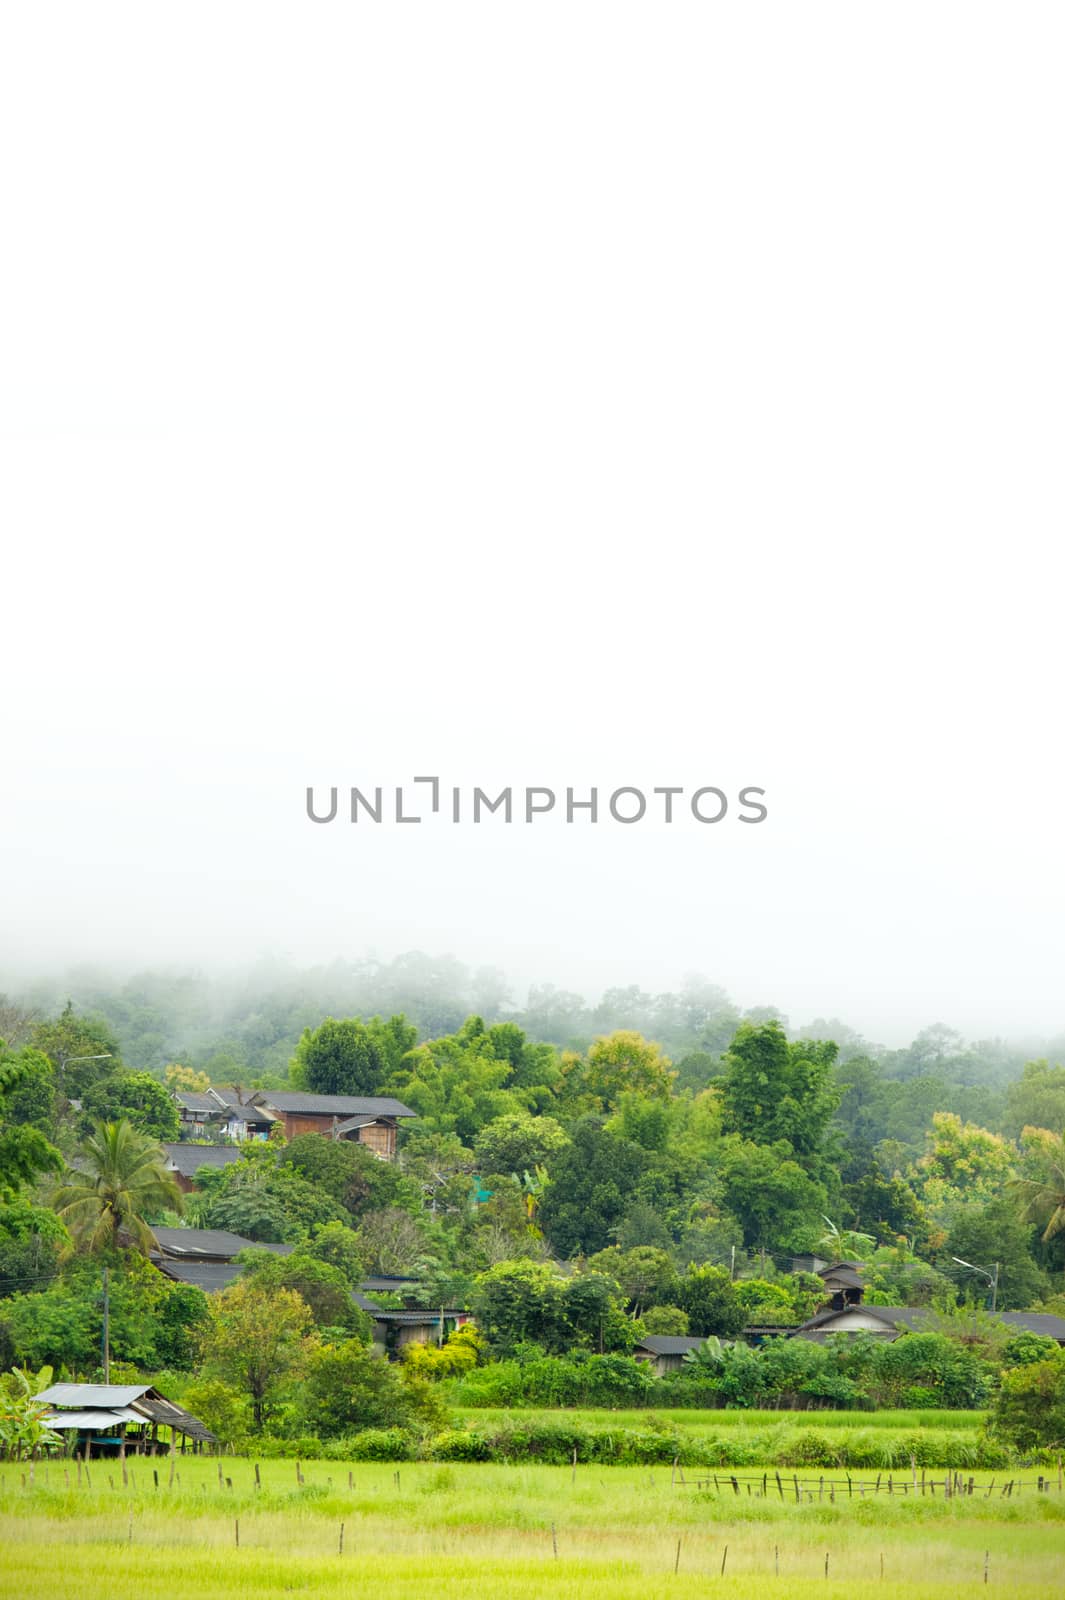 Rural villages of Thailand in the Asian zone and rice fields among the mountains and thick fog in the morning during the rainy season. The concept of people living with nature in perfect harmony.